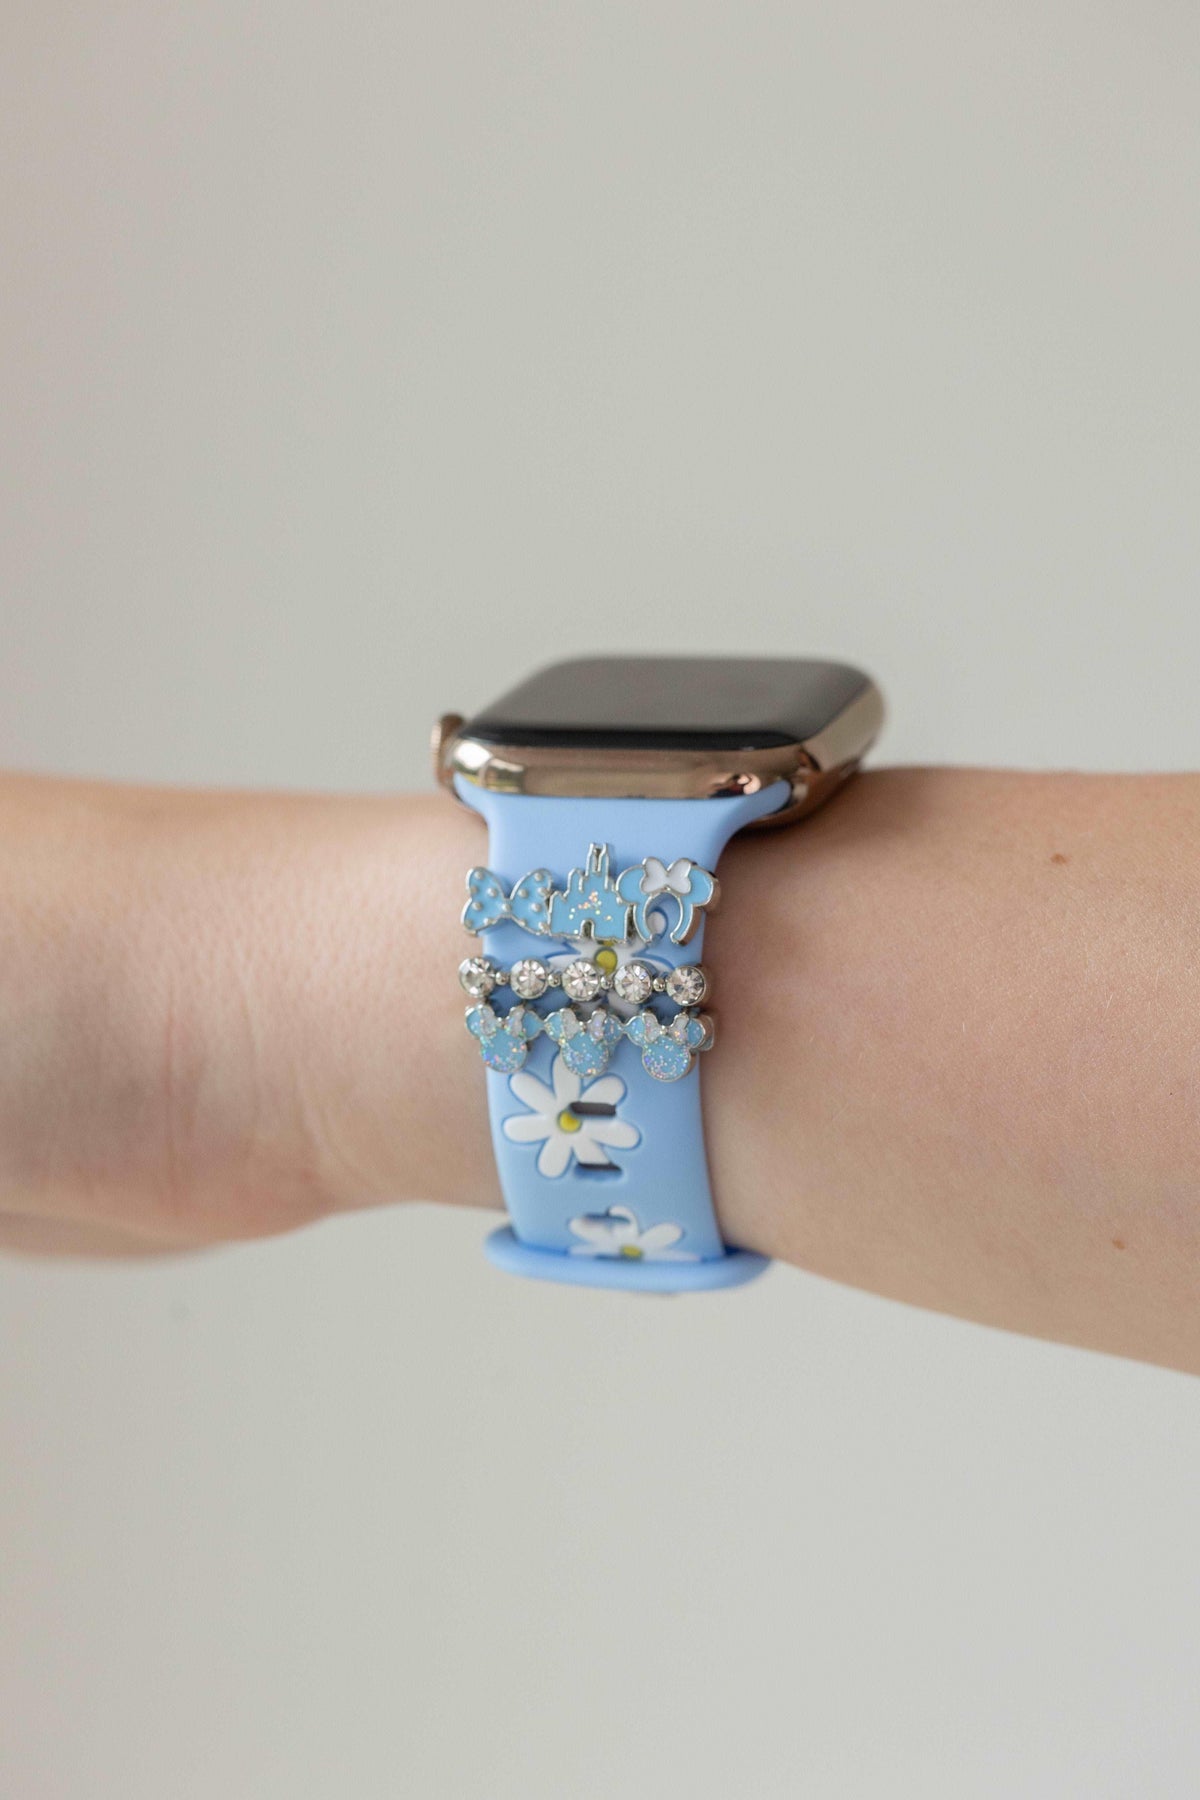 Baby Blue Tied Like a Bow Apple Watch Band